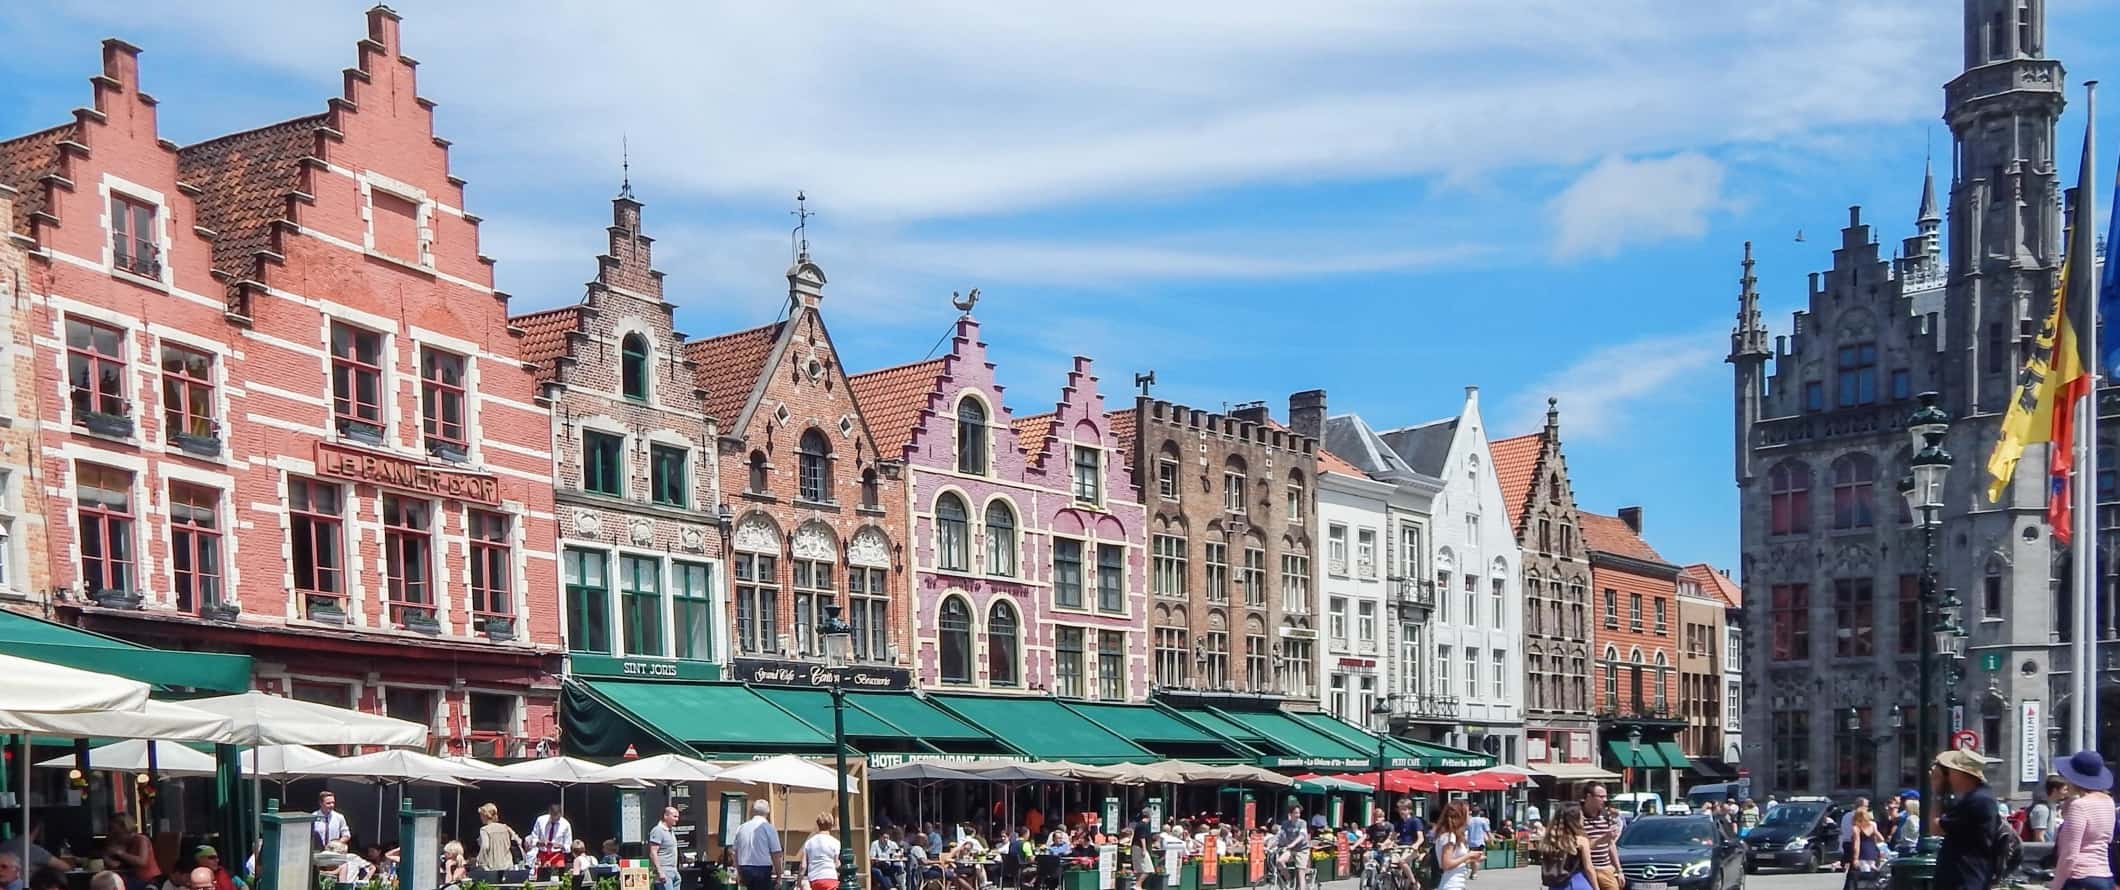 Grote Markt, the main historic square with colorful brick buildings in Bruges, Belgium.